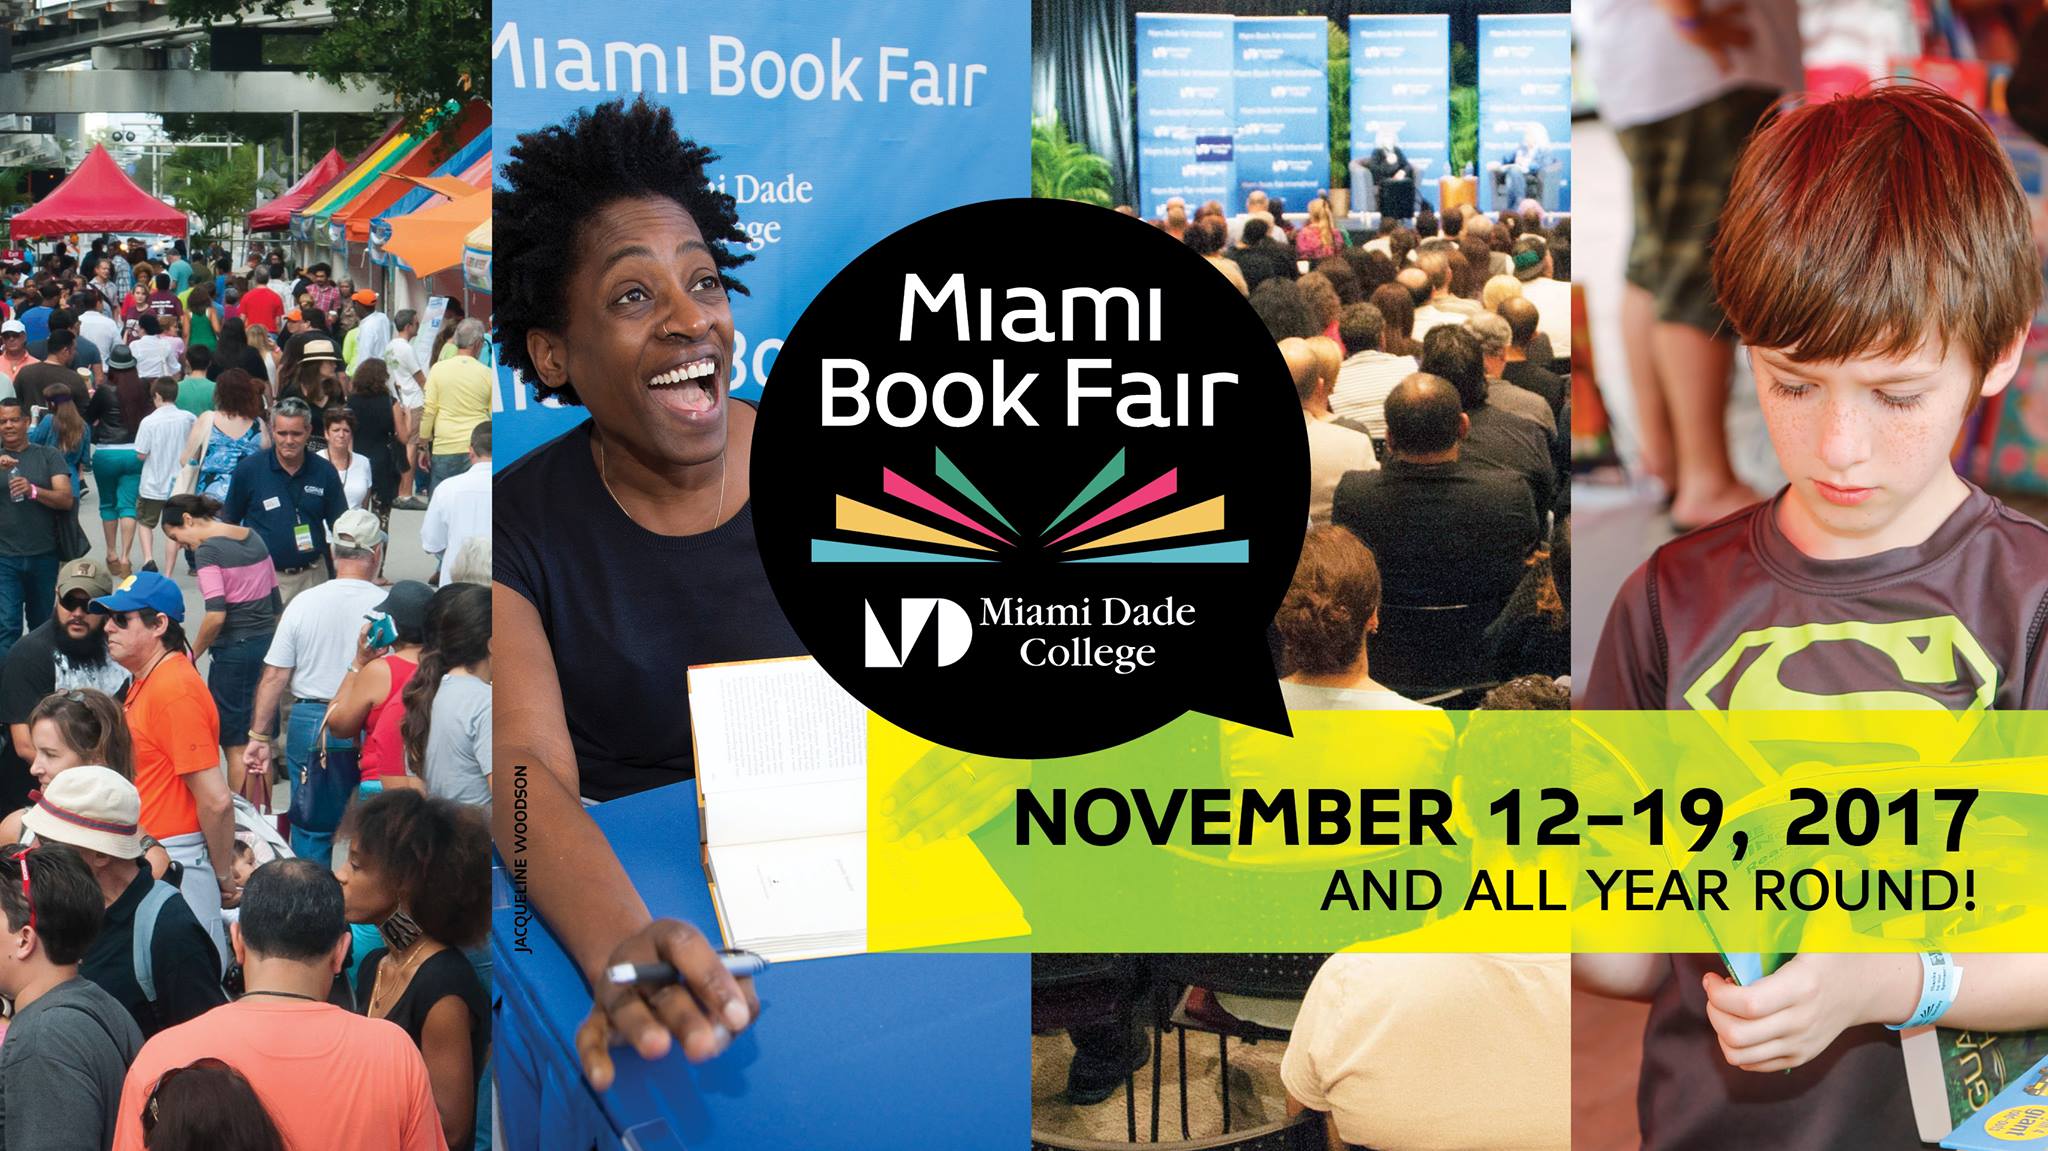 Promotion banner for the Miami Book Fair.